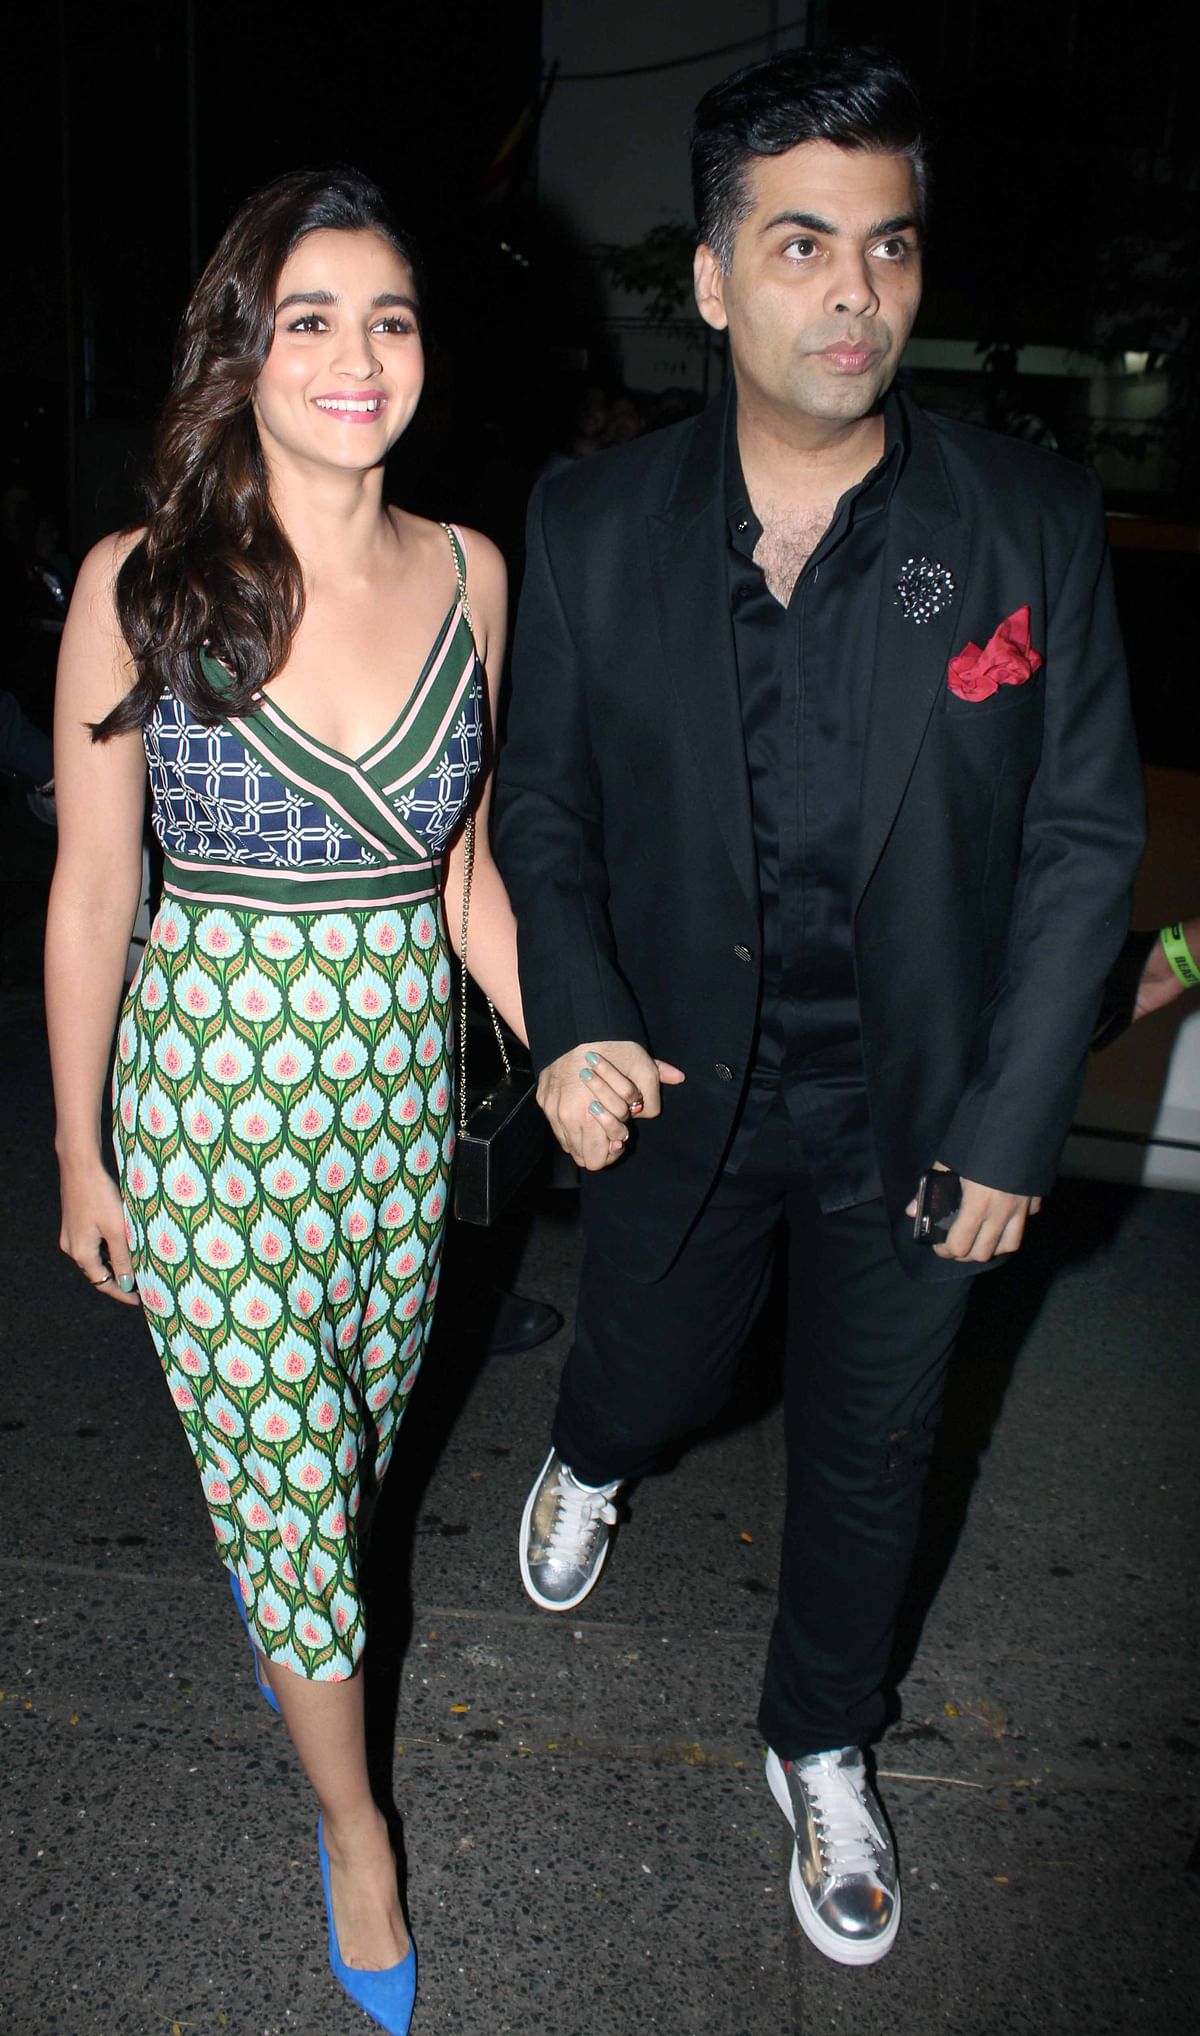 Saturday night was Bollywood night as all the stars got under one roof to party.